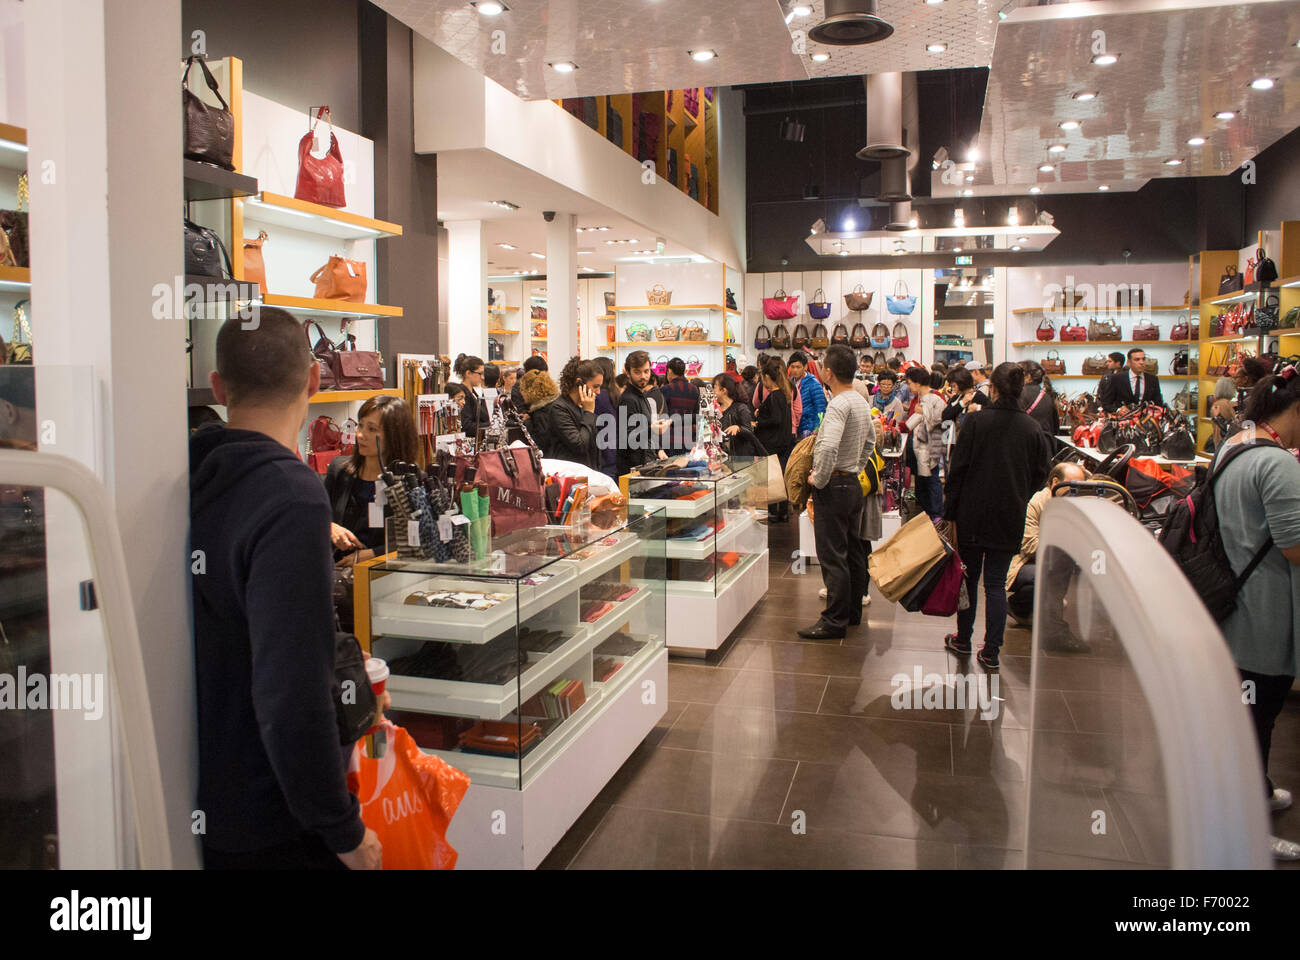 Paris, France, People Shopping in Luxury Outlet Mall, Centre Stock Photo: 90354490 - Alamy